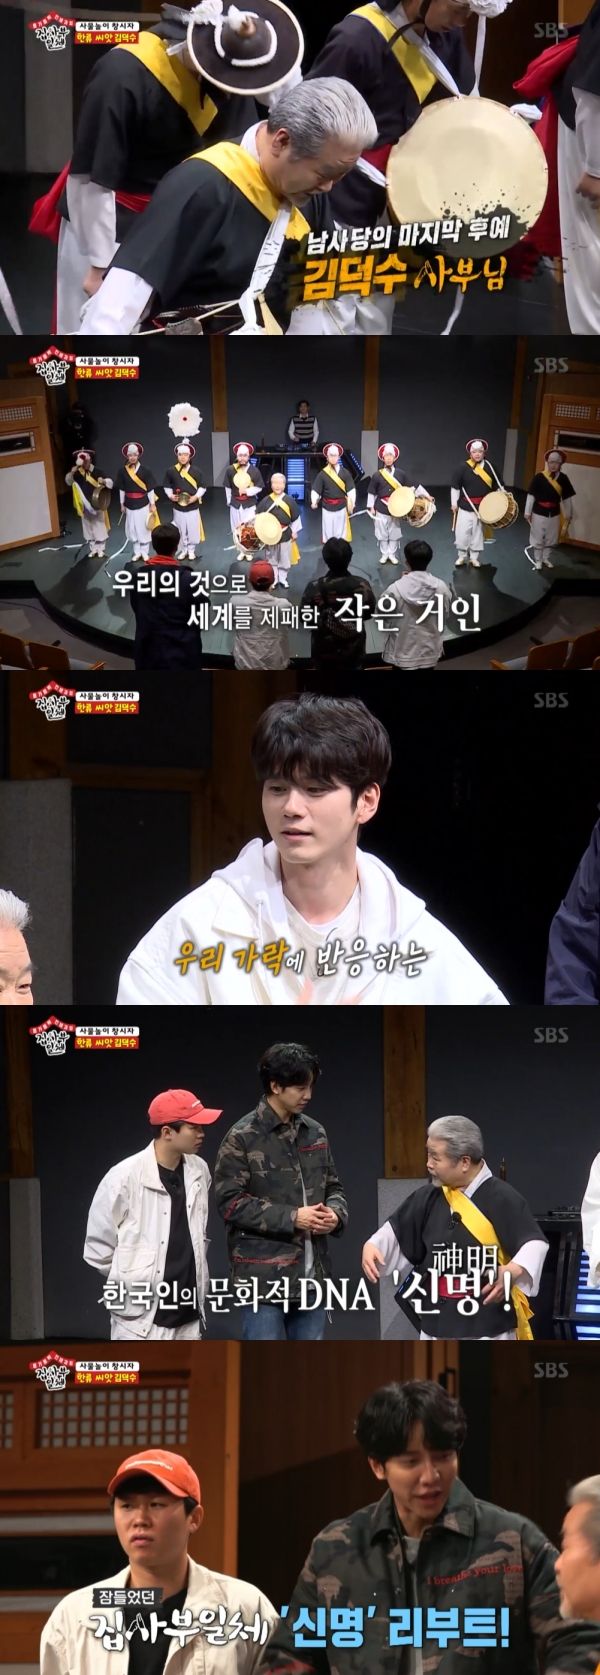 Kim Deok-soo showed off his samulnori performance.On SBS All The Butlers broadcasted on the 22nd, Kim Duk-soo, the founder of Samulnori, appeared in Master.Kim Duk-soo, the master of the broadcast, appeared on the stage of Samulnori.Lee Seung-gi welcomed him, saying, Im energy-filled and excited when I get close.Yang Se-hyung and Ong Sung-woo also admired I listen to music with my ears, but now I feel like listening to my eyes and heart, and I cry my heart.Its the seed in our blood. The cultural gene we have. Its called Nomen novum, explained Master Kim Duk-soo.It is important to study our Nomen novum, which we have forgotten at this time today, and we have everything, he added.Lee Seung-gi added, Its about pulling out our DNA.On the other hand, Kim Deok-soo said, It is globalized with the times. Tradition is not followed and introduced.I keep my essence and change clothes according to the times. 